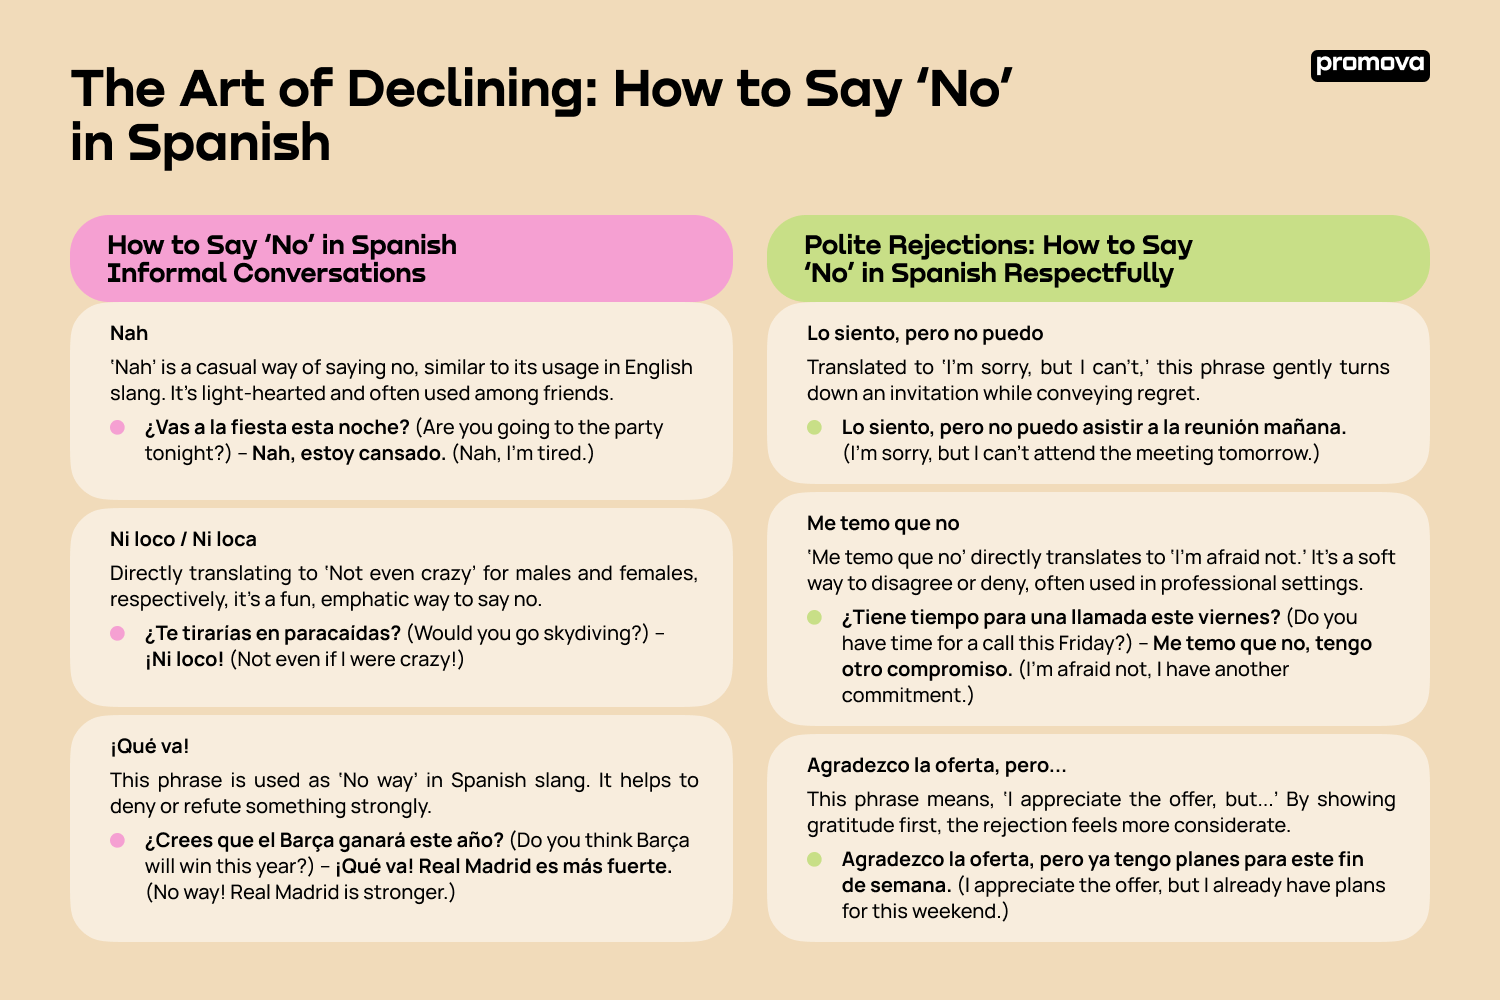 Exploring How to Say ‘No’ in Spanish